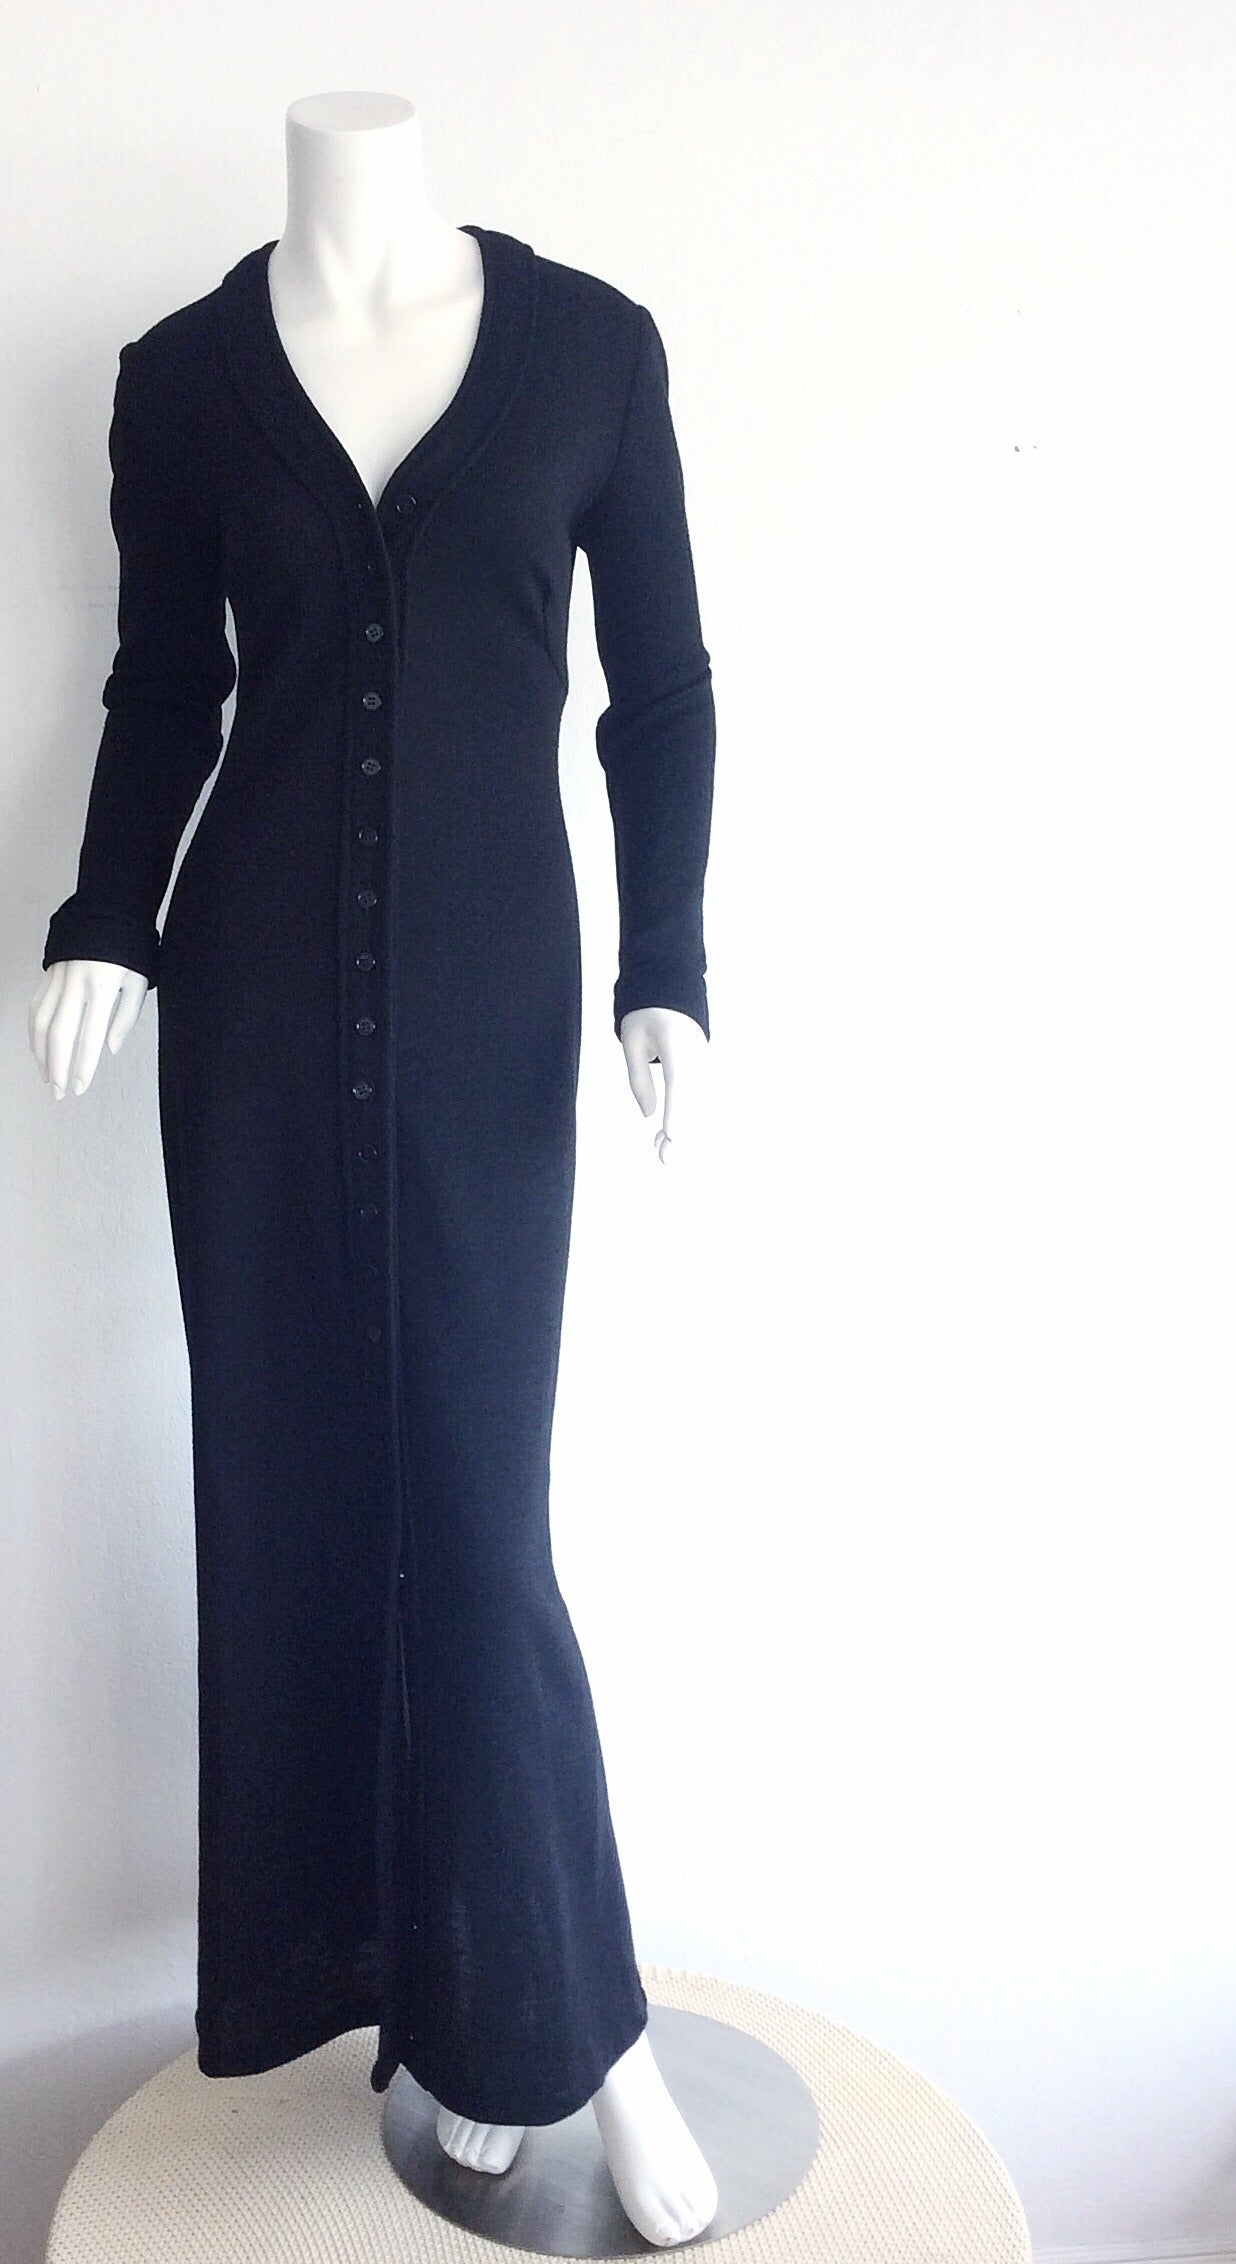 Incredible Vintage Mary Quant for Bonwit Teller Black Wool Shirt Dress 1